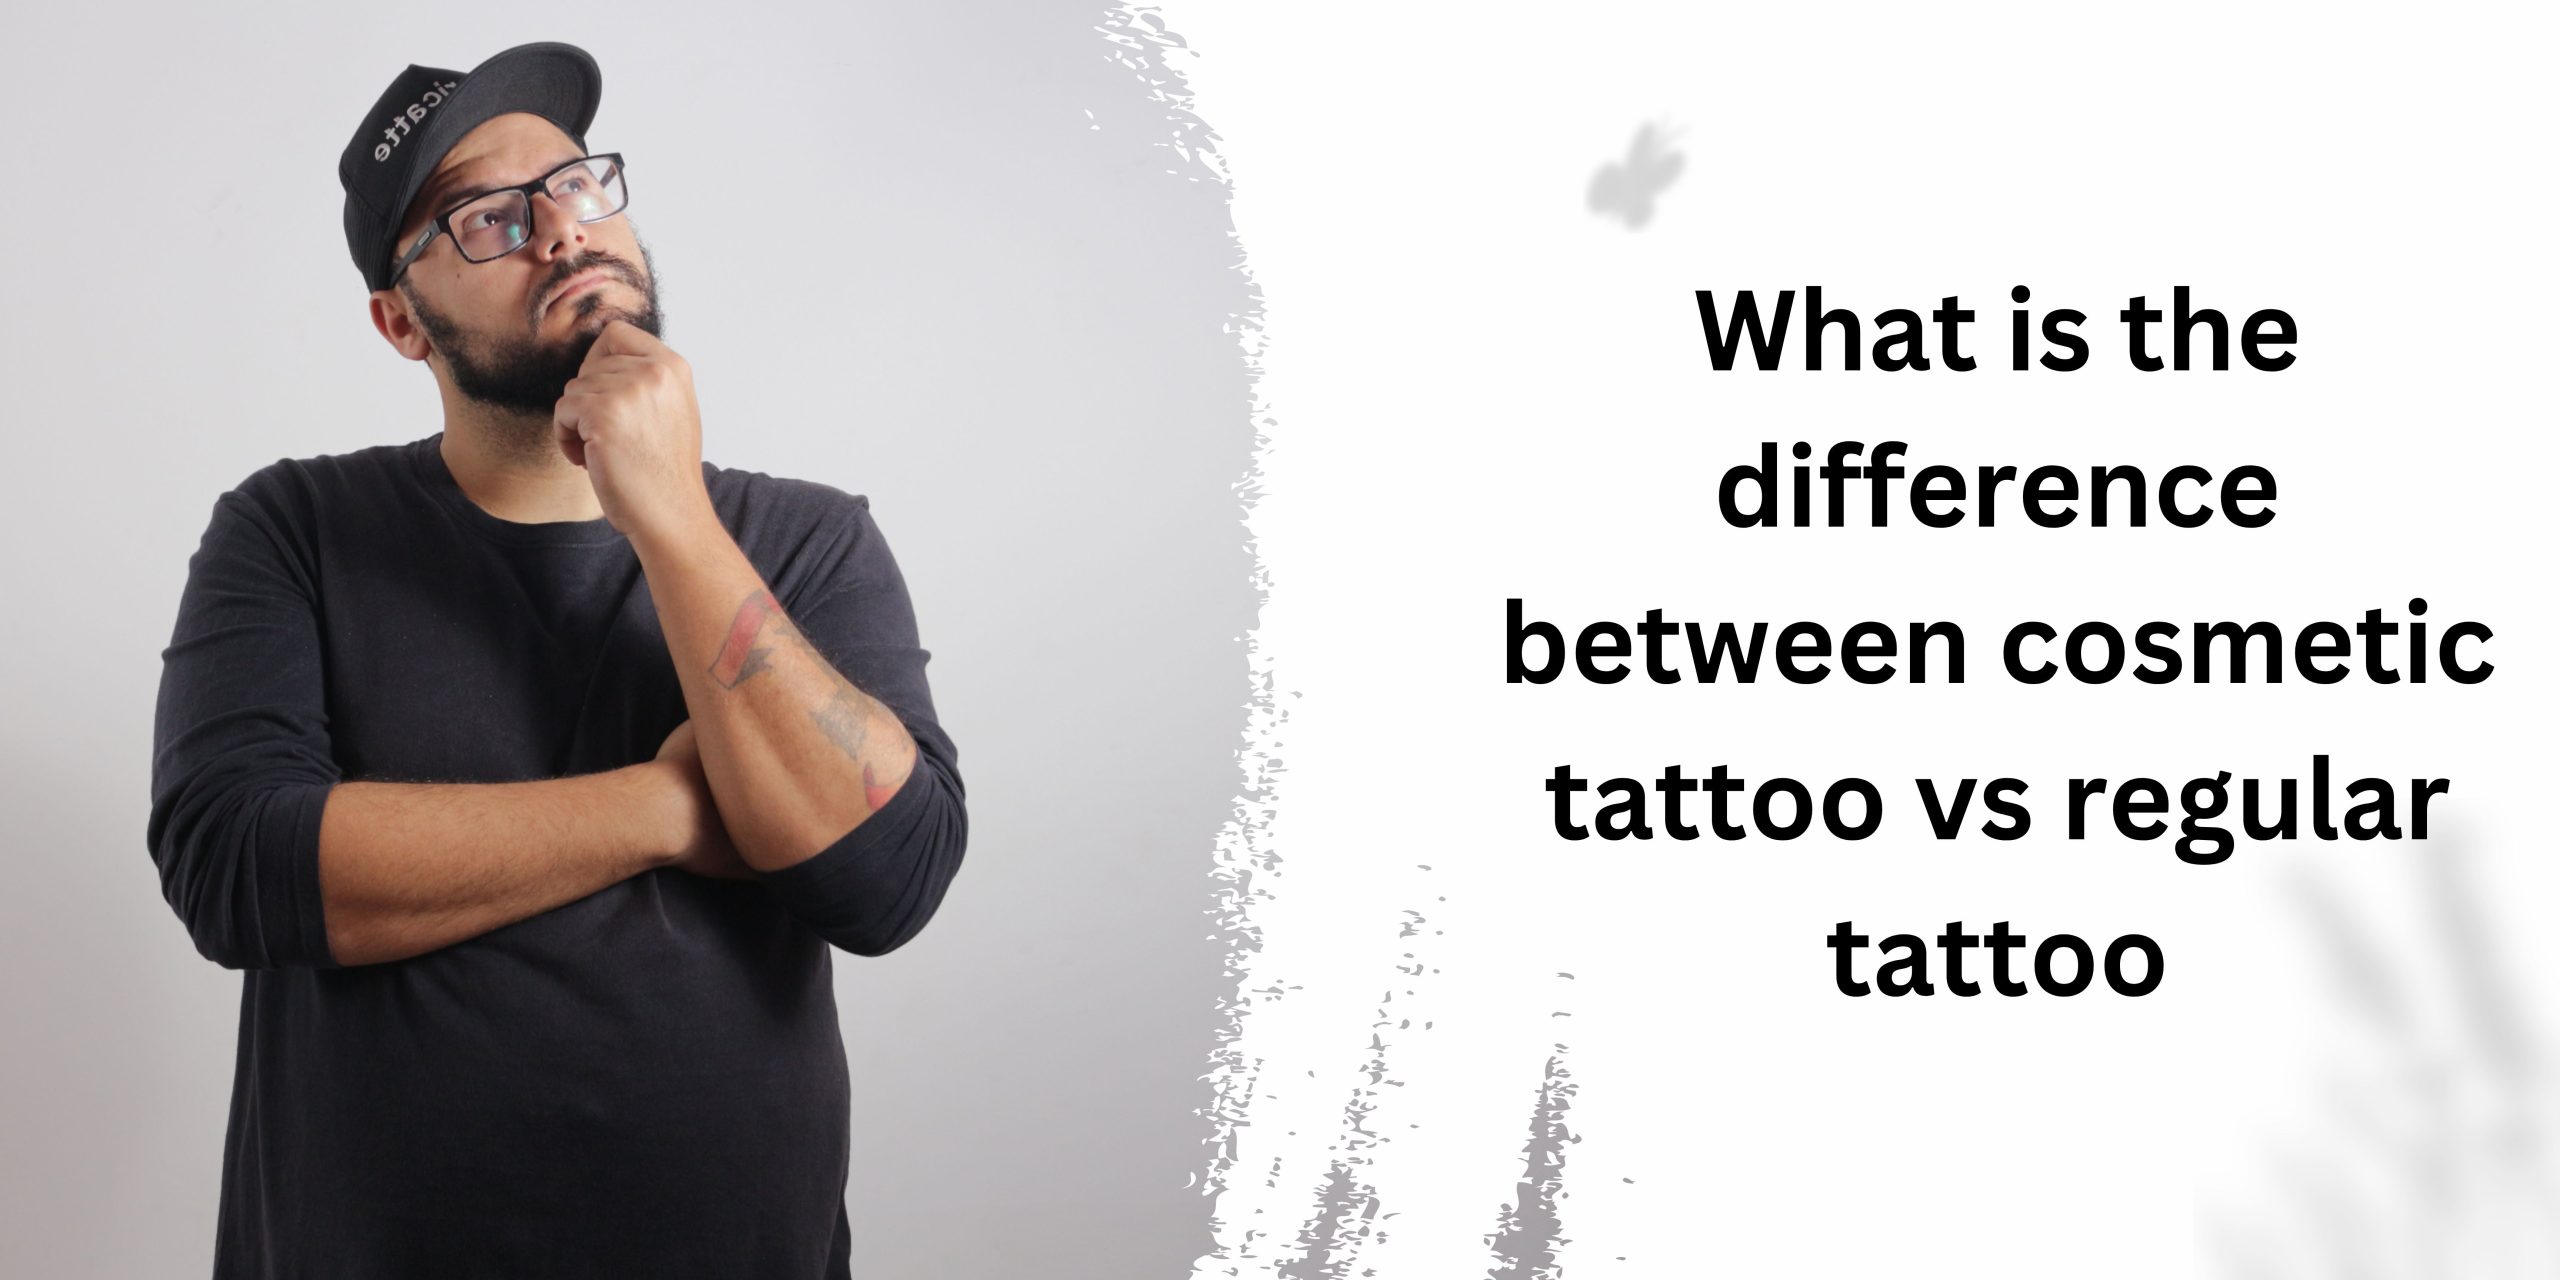 What is the difference between cosmetic tattoo vs regular tattoos